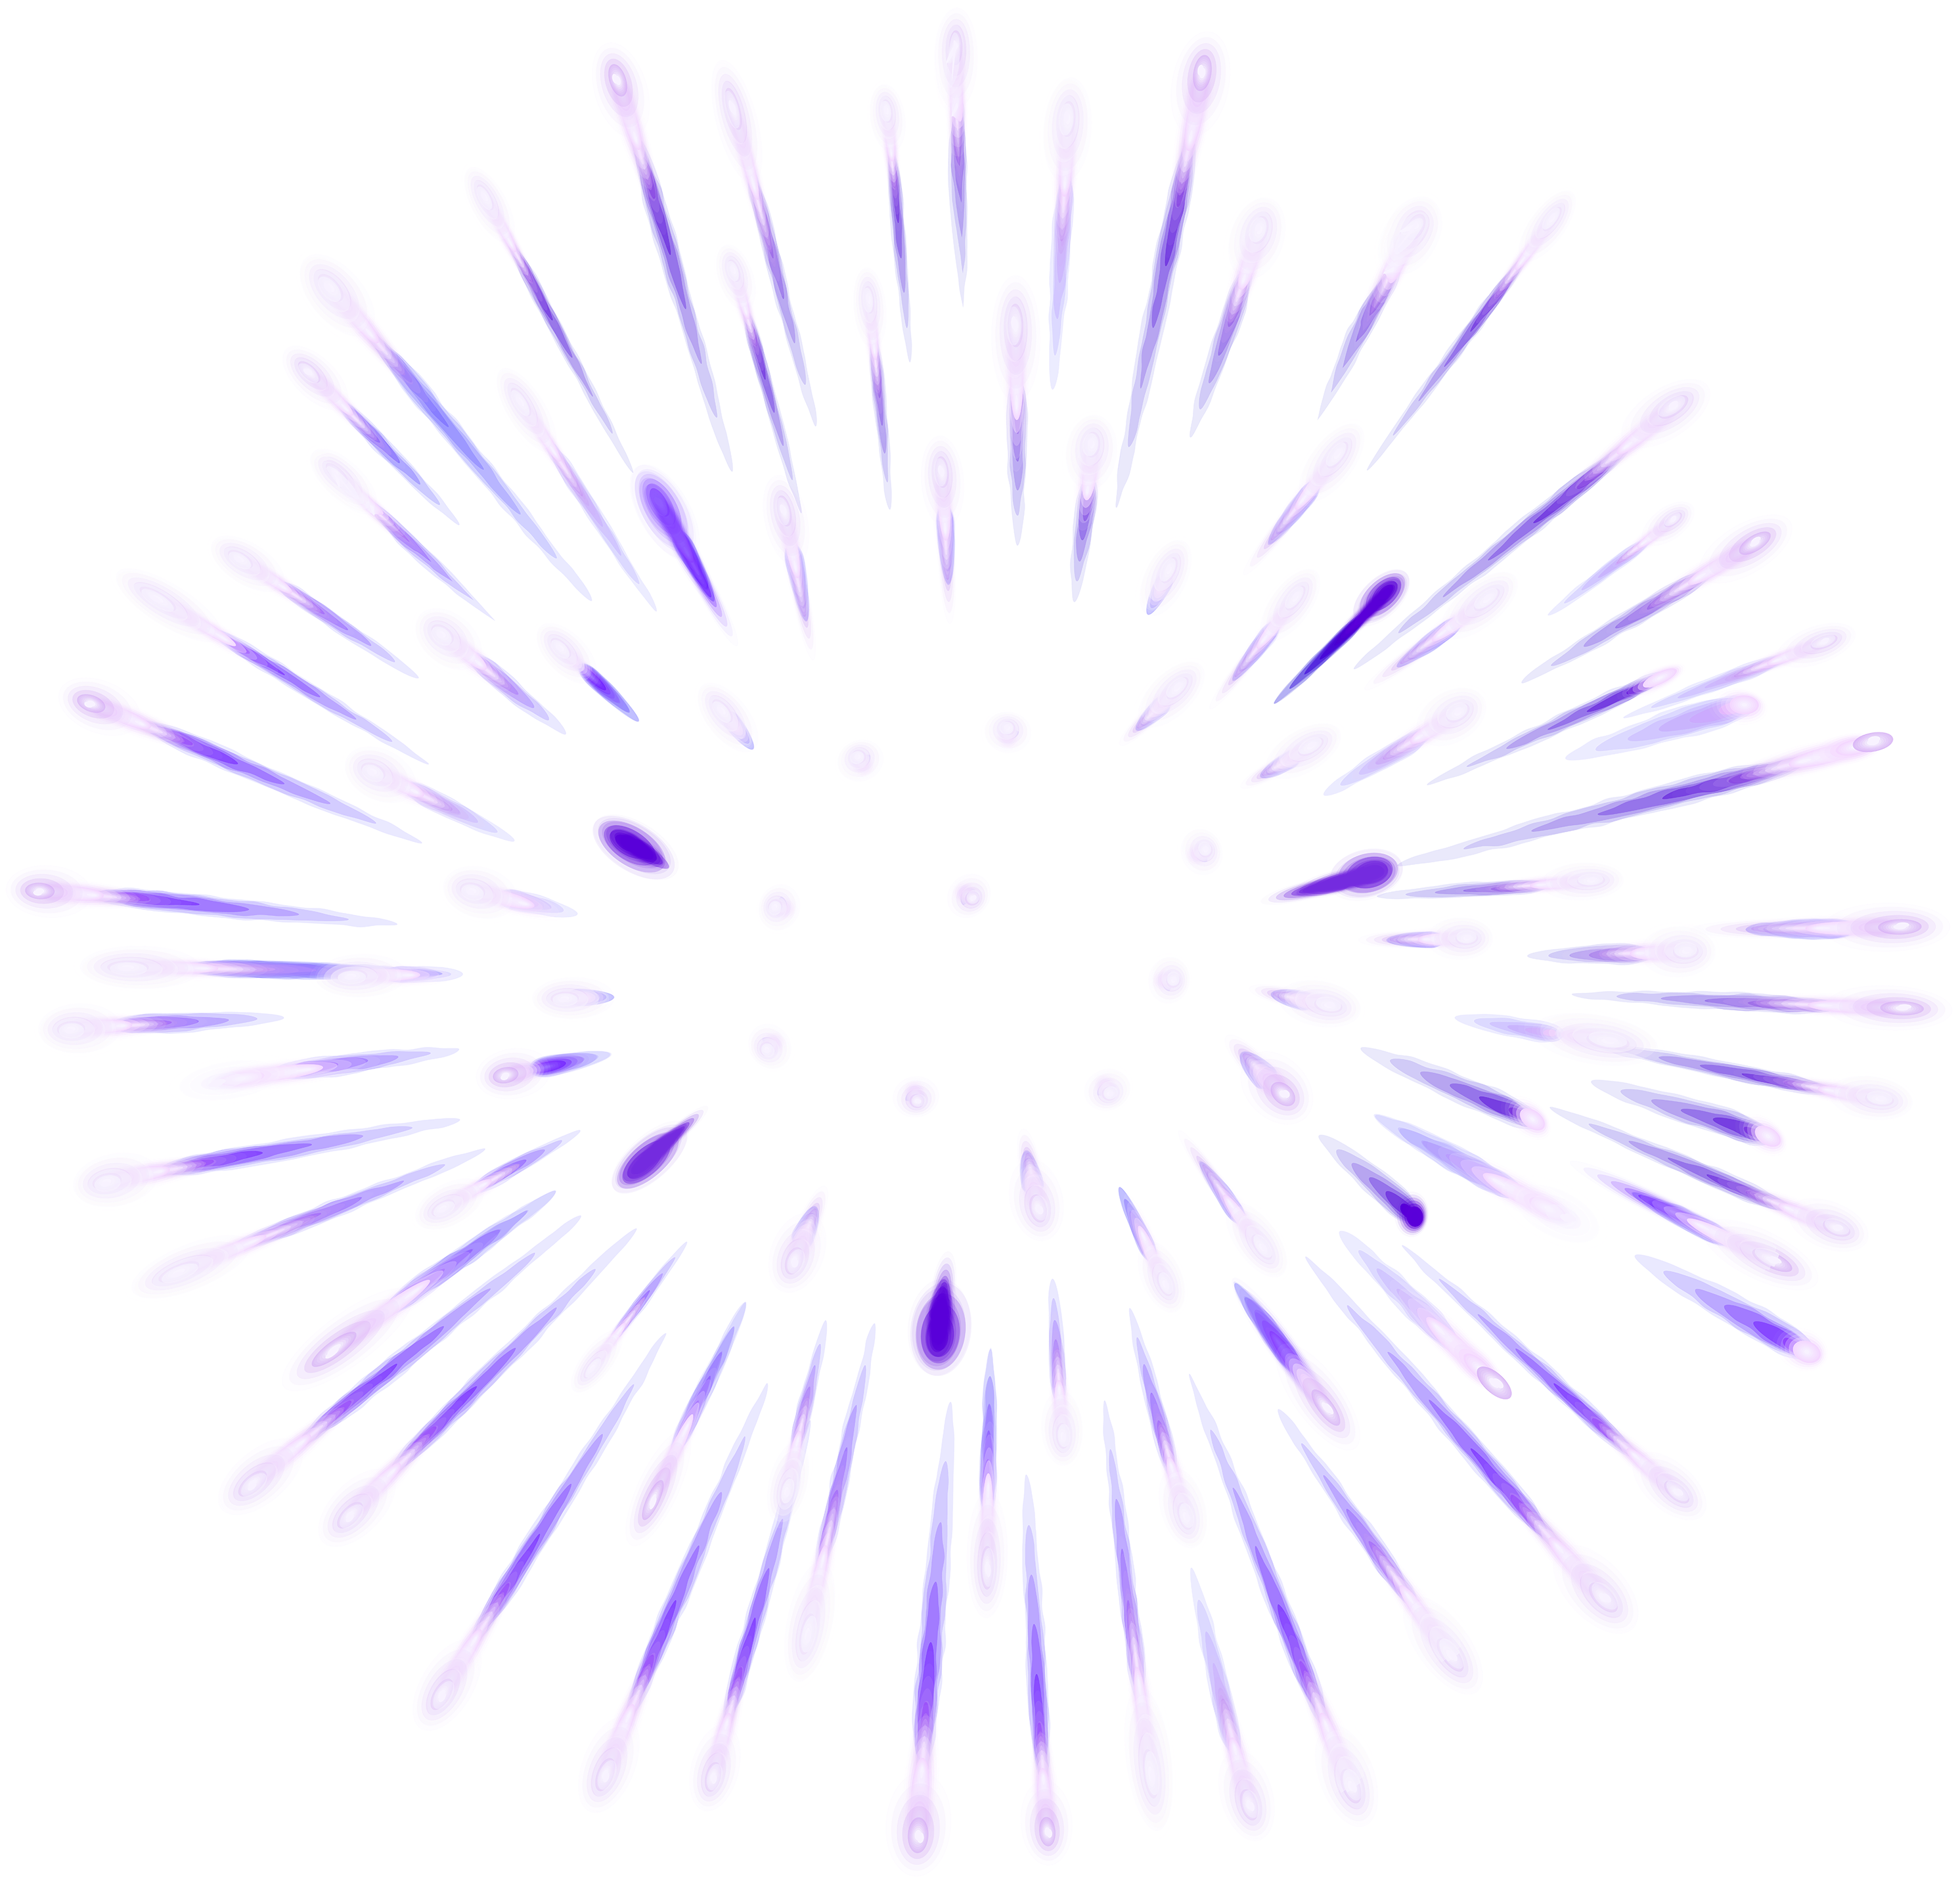 Abstract Firework Explosion Graphic